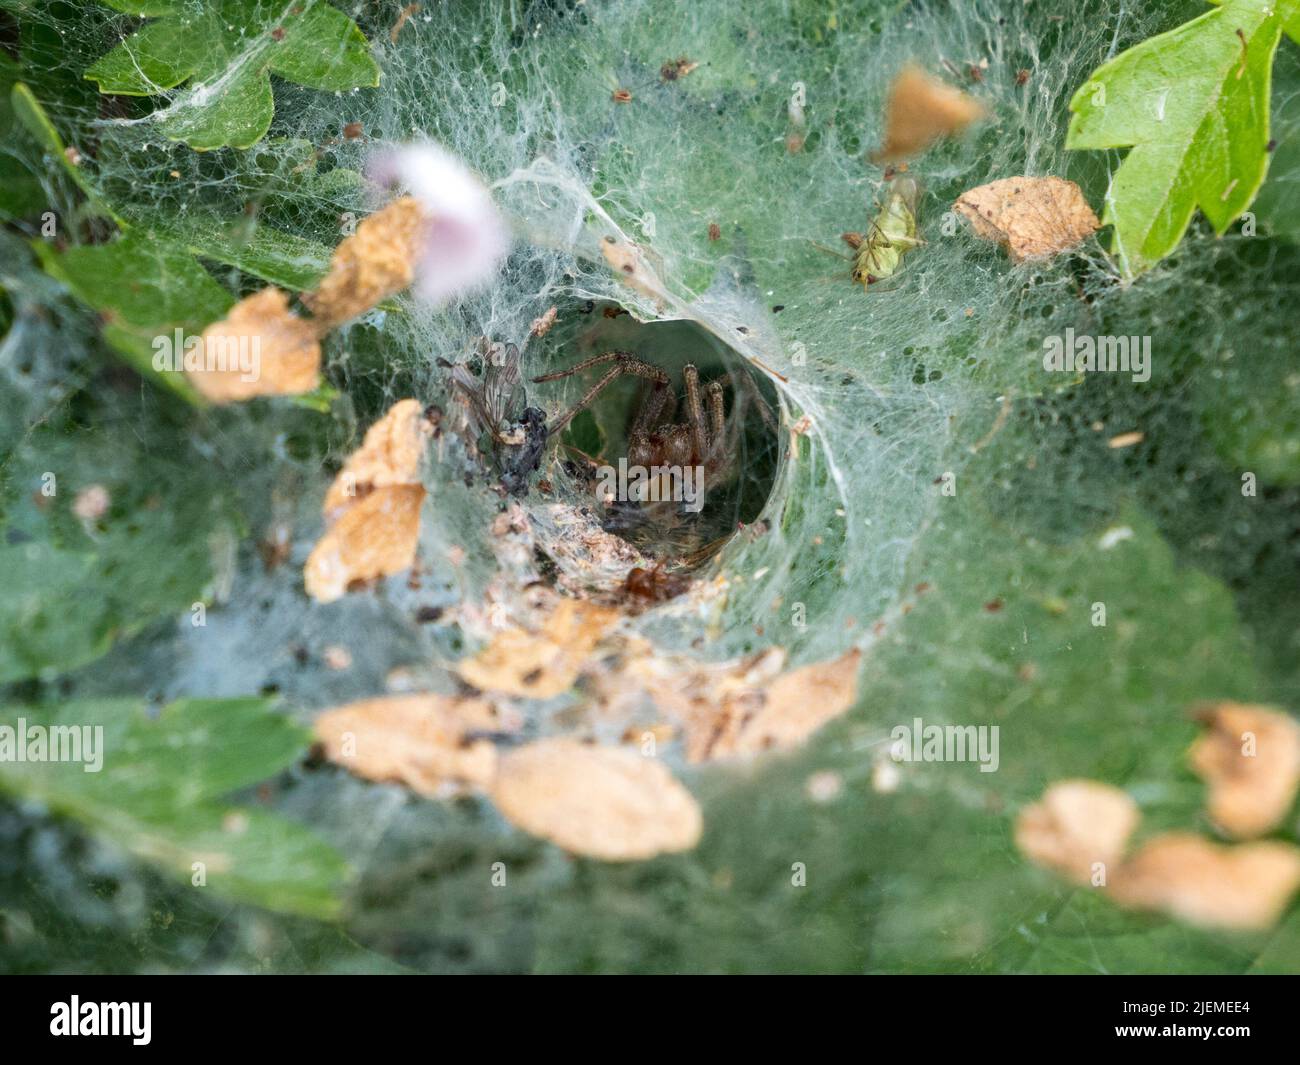 A  Labyrinth spider (Agelena labyrinthica) sitting in its funnel web on Hounslow Heath, London, UK. Stock Photo